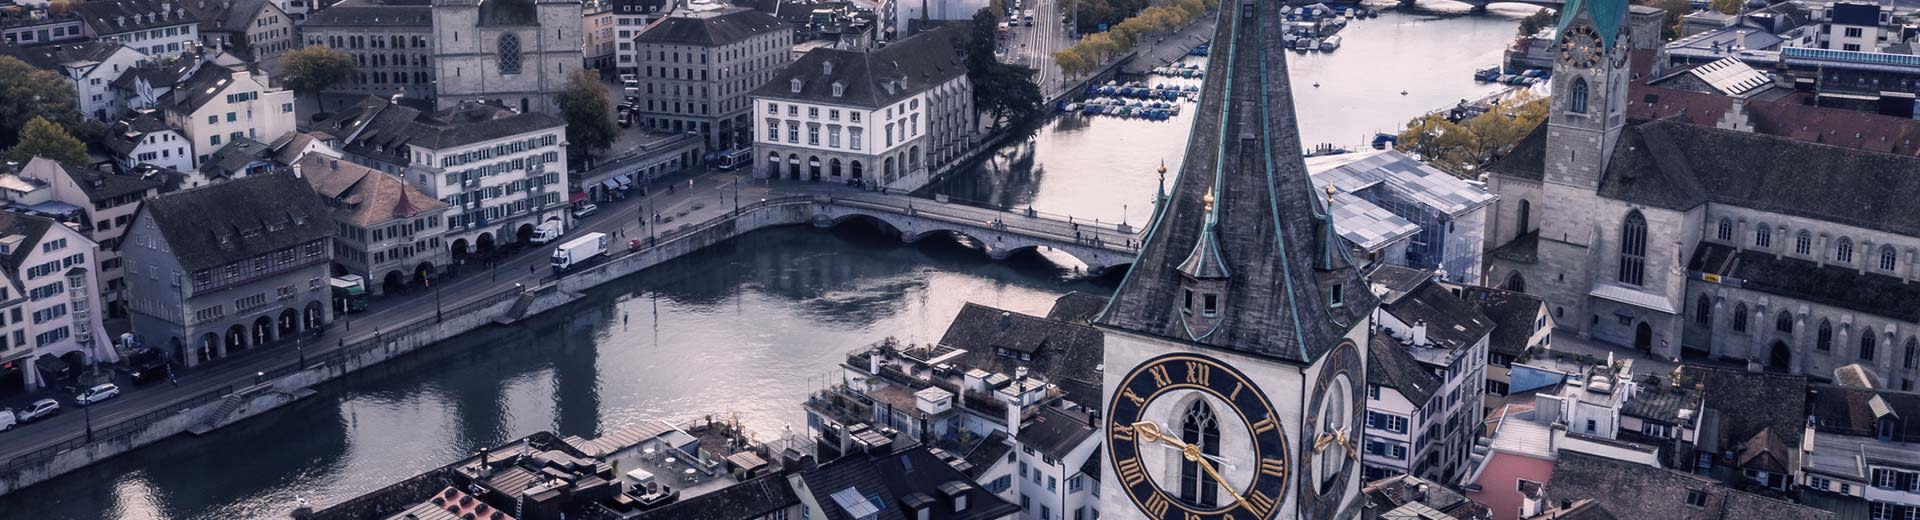 Aerial view of the river Limmat in Zurich at dusk or dawn, with an imposing church before it.